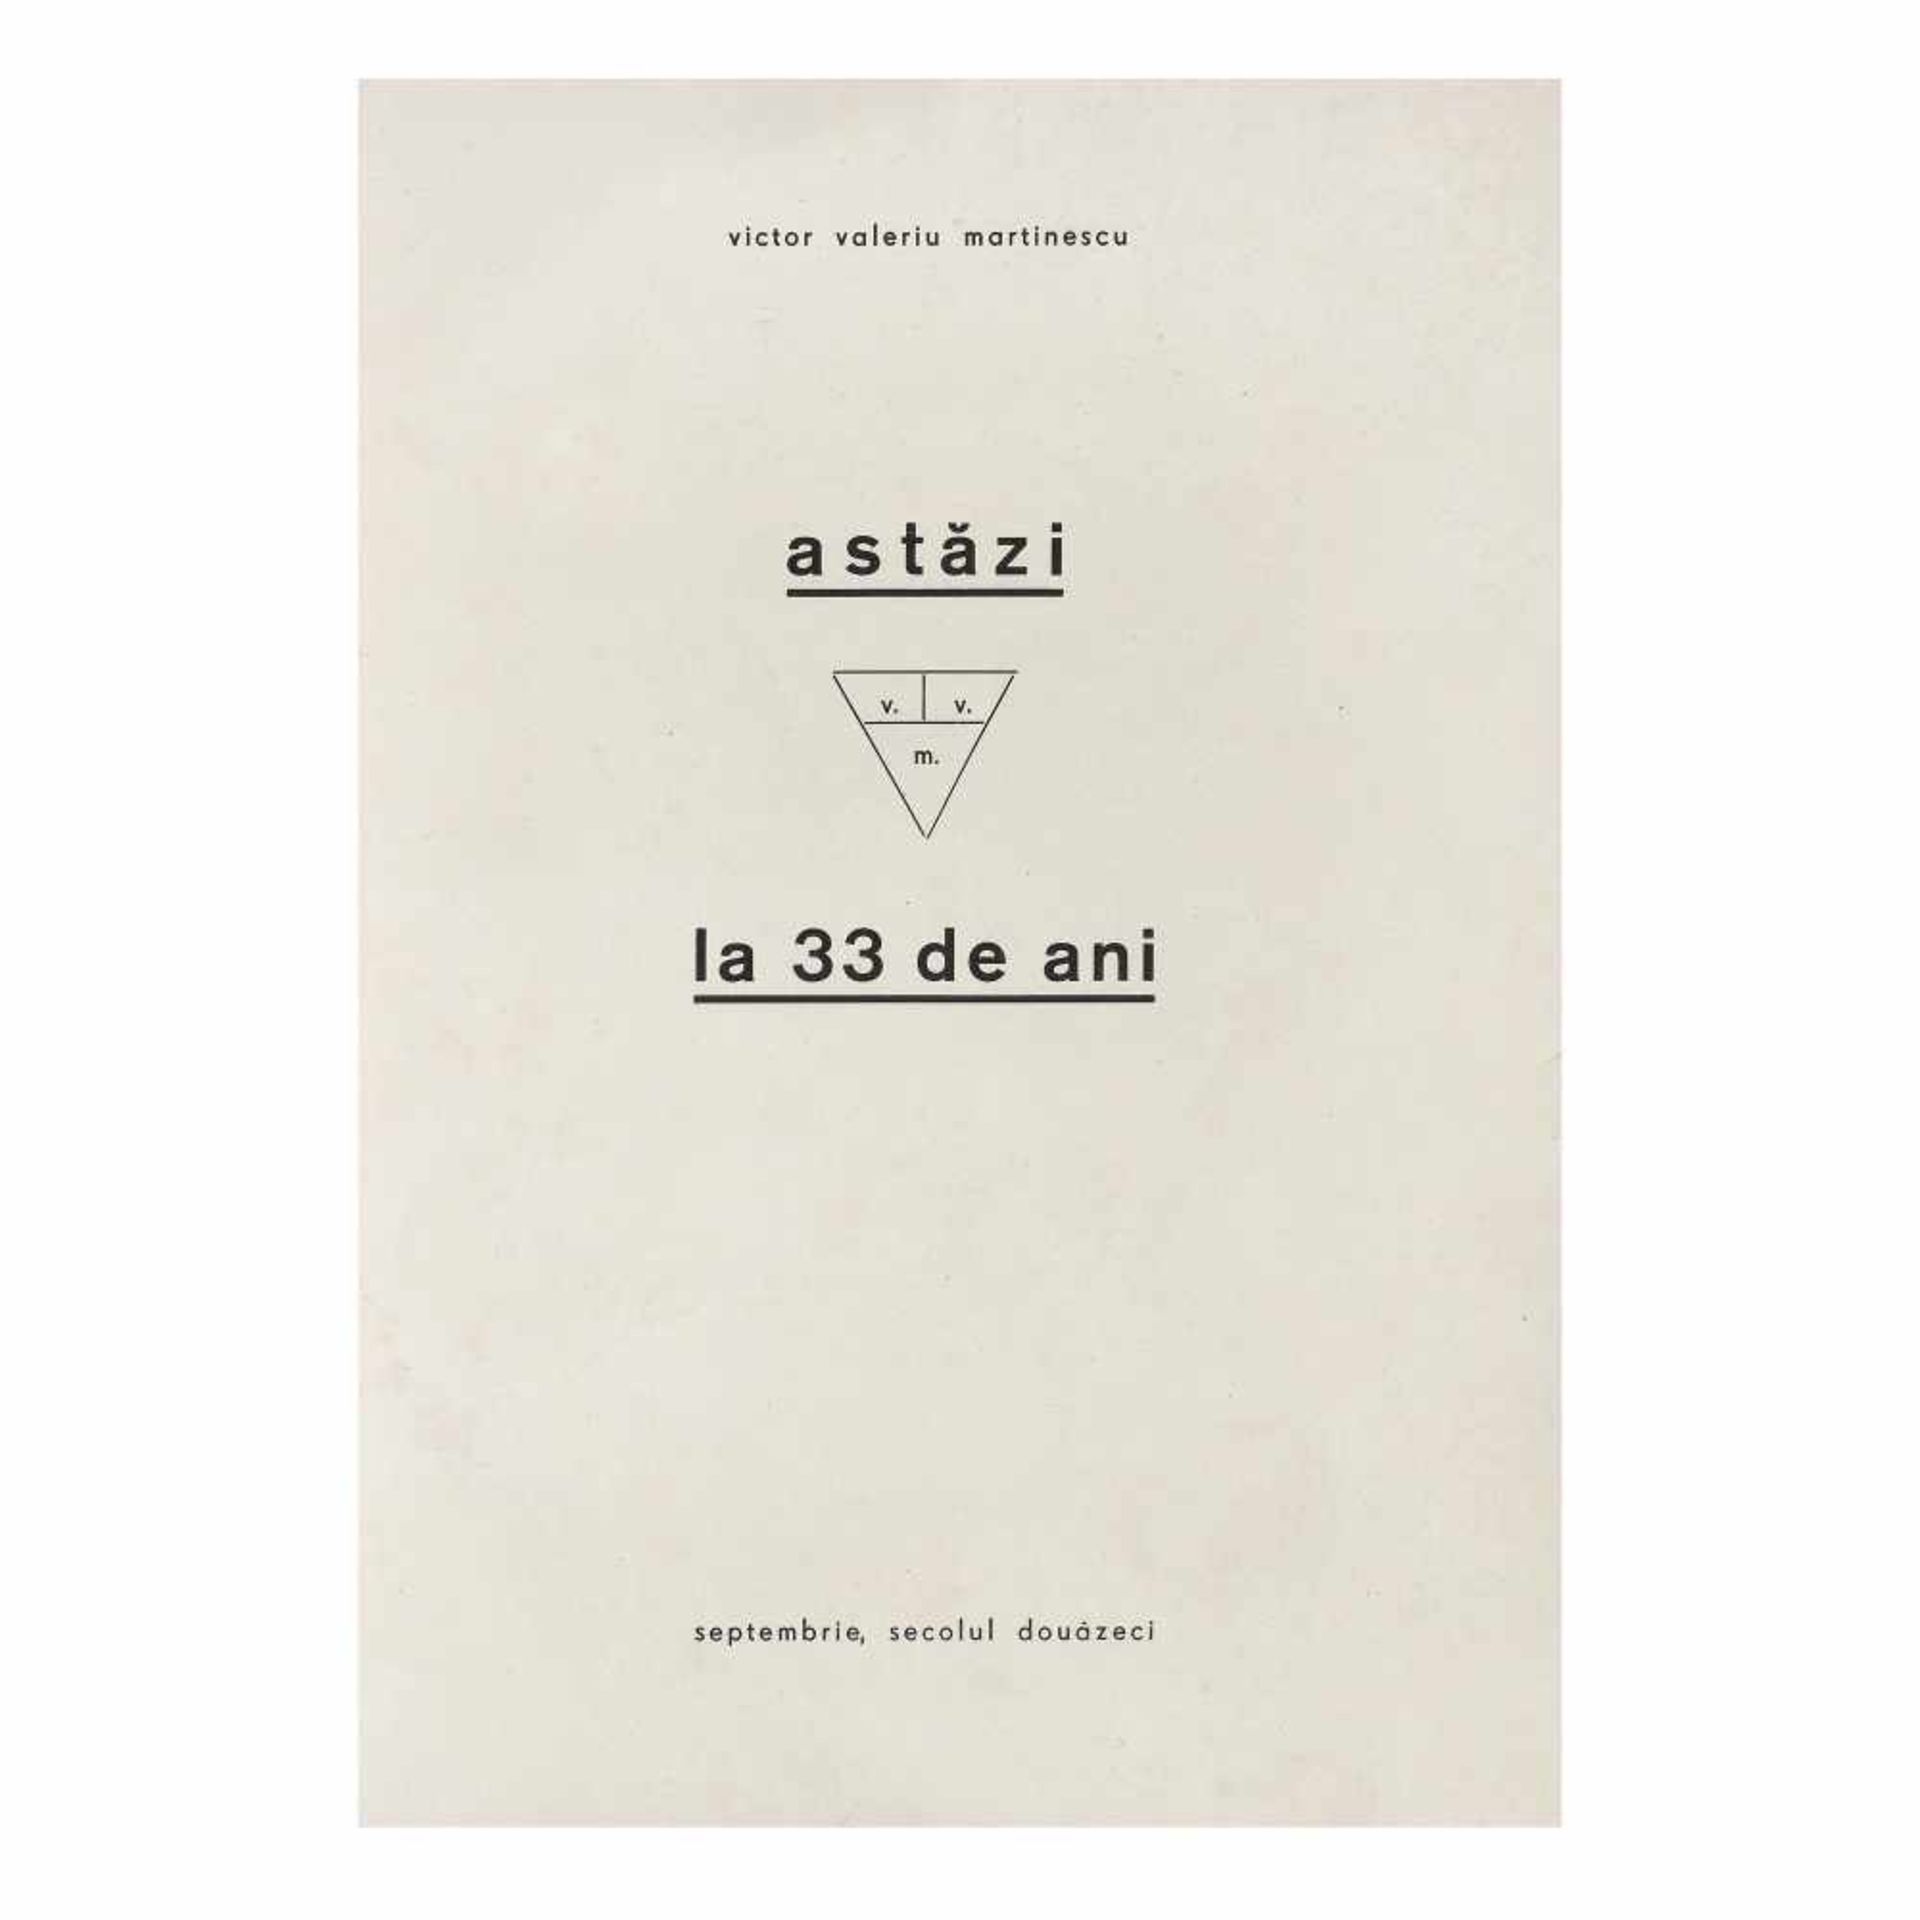 "Astăzi la 33 de ani" ("Today at 33"), by Victor Valeriu Martinescu, Bucharest, with three drawings - Image 2 of 6